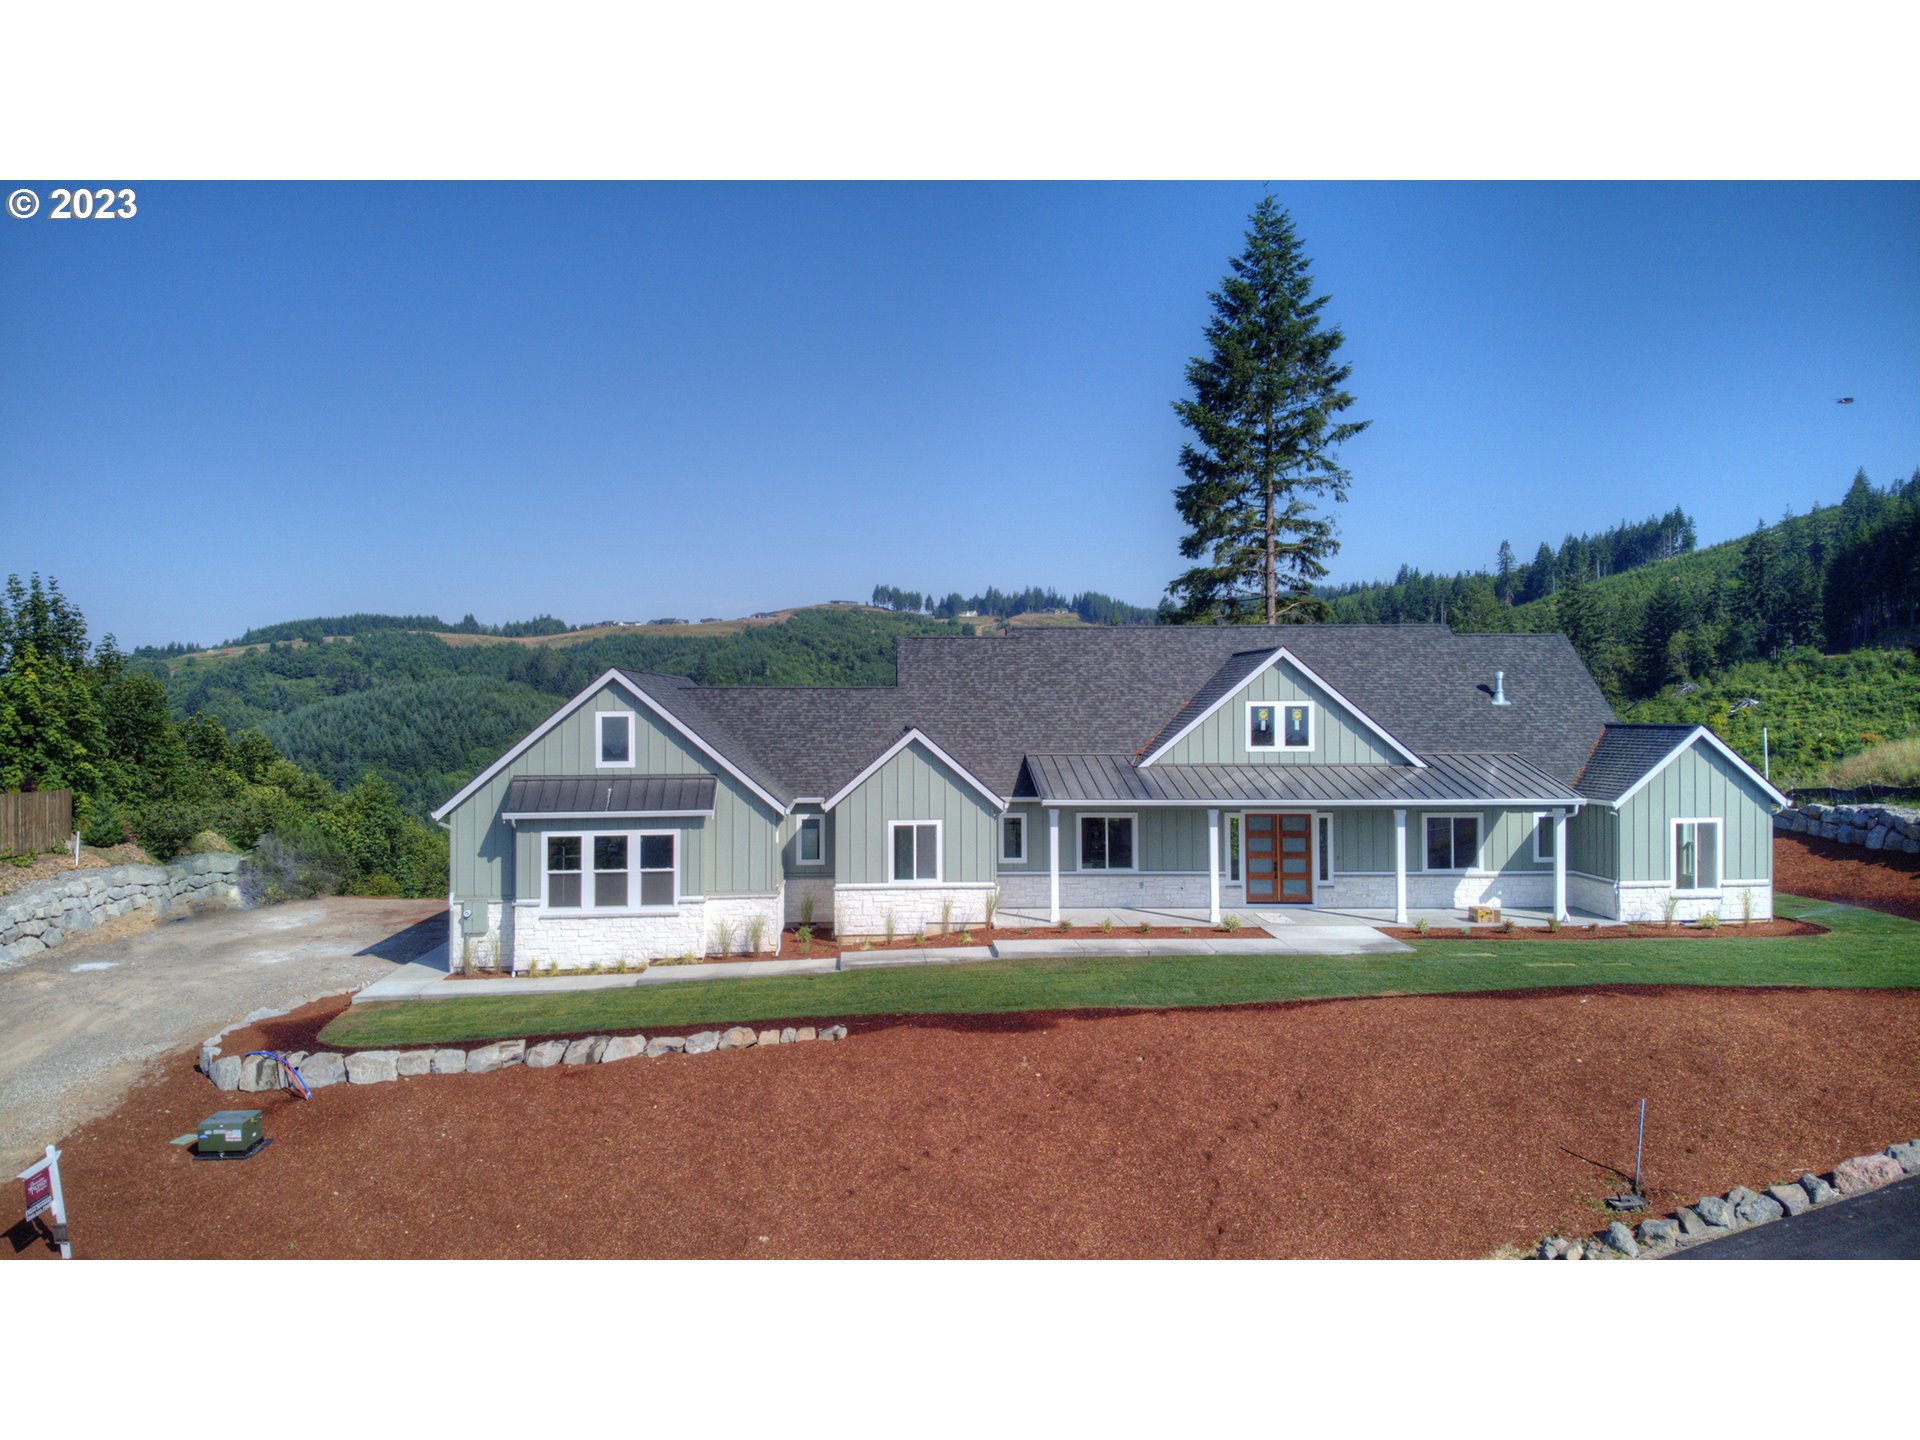 825 SOMMERSET RD, Woodland, WA 98674